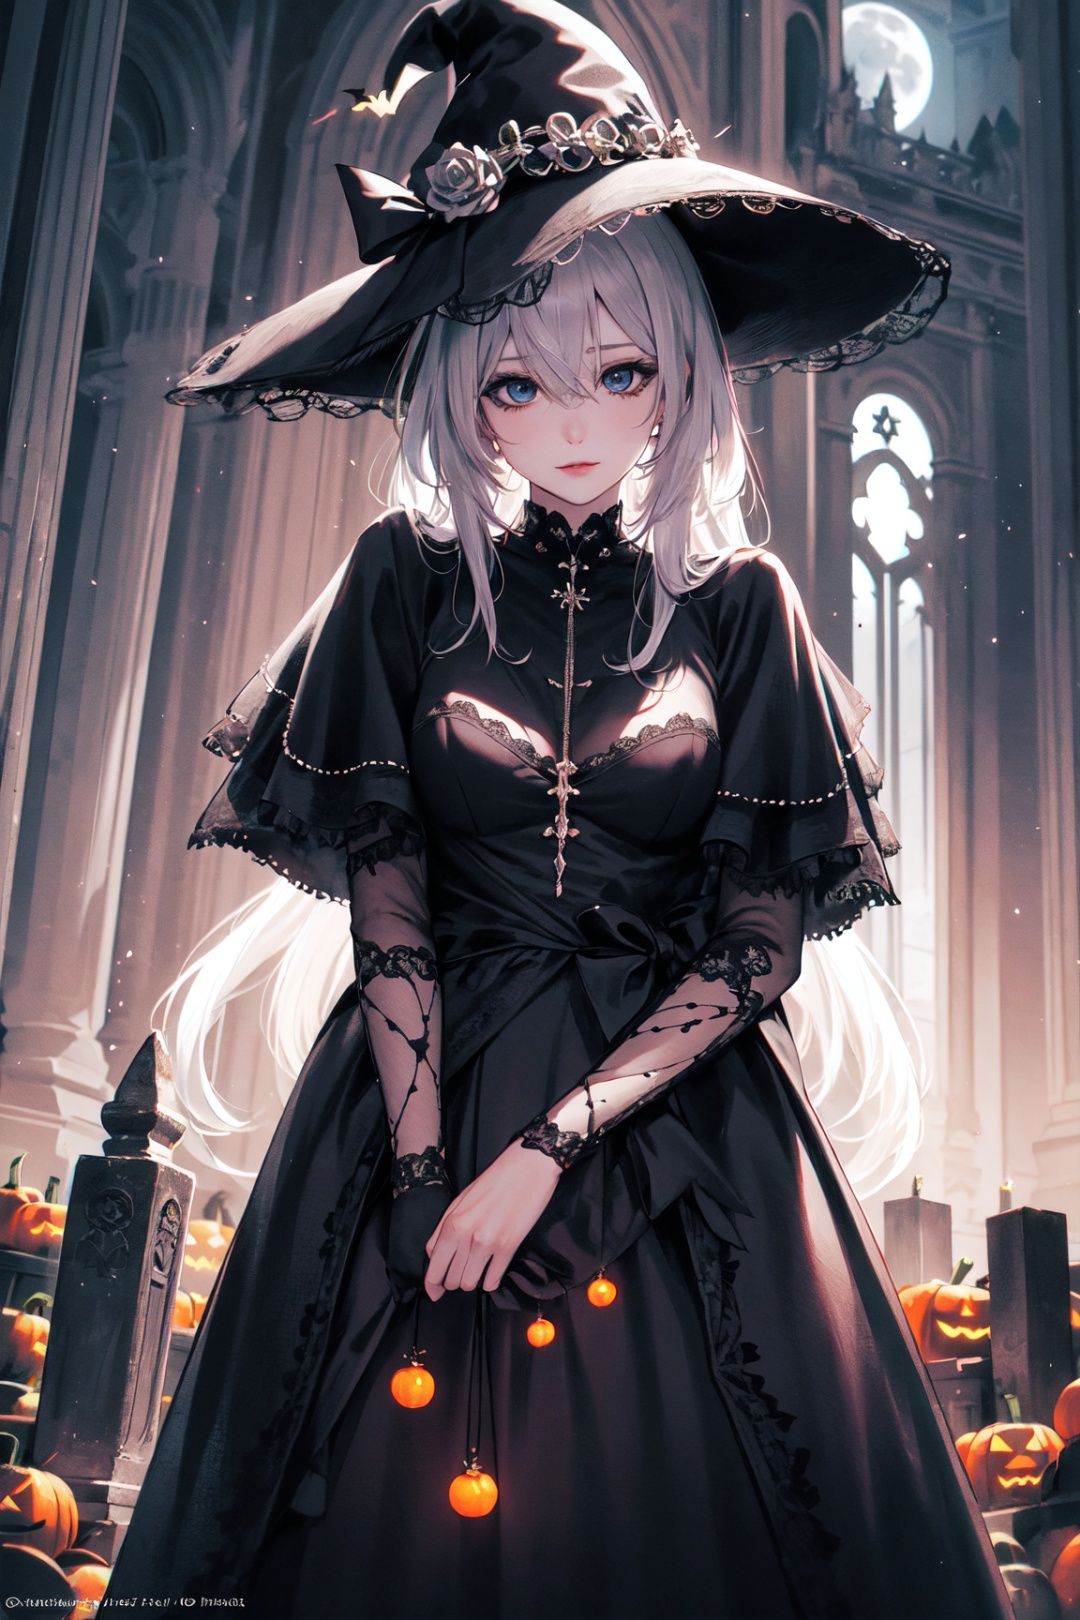  1 girl, Asian teenager, Halloween costume, masterpiece, best quality, ultra high res, highly detailed, psychedelic art (1.4), woman-demon (1.3), floating in dark mist (1.1), furry girl, anime furry women, (best quality), (masterpiece), (realistic), detailed, portrait, close up, young female, RAW photo, UHD, DSLR, rainbow hair, high quality, realistic, photo-realistic, dreamlike art, lens flare, upper body, looking at viewer, animal focus, furry, wolf fursuit, cute, kawaii, lovely, fur, fur head, wolf head, narrow waist, wolf ears, black choker, blush, paw, paw shoes, rainbow clothes, stunning gradient colors, no watermark signature, detailed background, woods, small lake with island, insanely detailed, visually stunning, wicked, hypnotic, alluring, cowboy shot, intricate, perfect shading, veil, beautiful, award-winning illustration, cosmic space background, ethereal atmosphere, ultra quality, beautiful girl, cosmic concept, rainbow strings, rainbow skin, rainbow bloody veins growing and intertwining out of the darkness, nailed wire, oozing thick blue blood, sharp neon, veins growing and pumping blood, vascular networks growing, green veins everywhere, yin and yang, glowing space, glowing stars, infinity symbol, dynamic pose, flying pose, glowing body, rainbow aura (1.1), beautiful angel, clockwork, lightning, majestic, breathtaking, guangying on face, jack-o'-lantern, witch hat, spider web, bats, haunted mansion, graveyard, full moon, eerie night sky, trick-or-treat bag, candy corn, spooky decorations, ghostly apparitions, pumpkin patch, creepy crawlies, scarecrow, witches' brew, cauldron, black cat, gothic elements, supernatural powers, magical spells, spellbinding enchantment